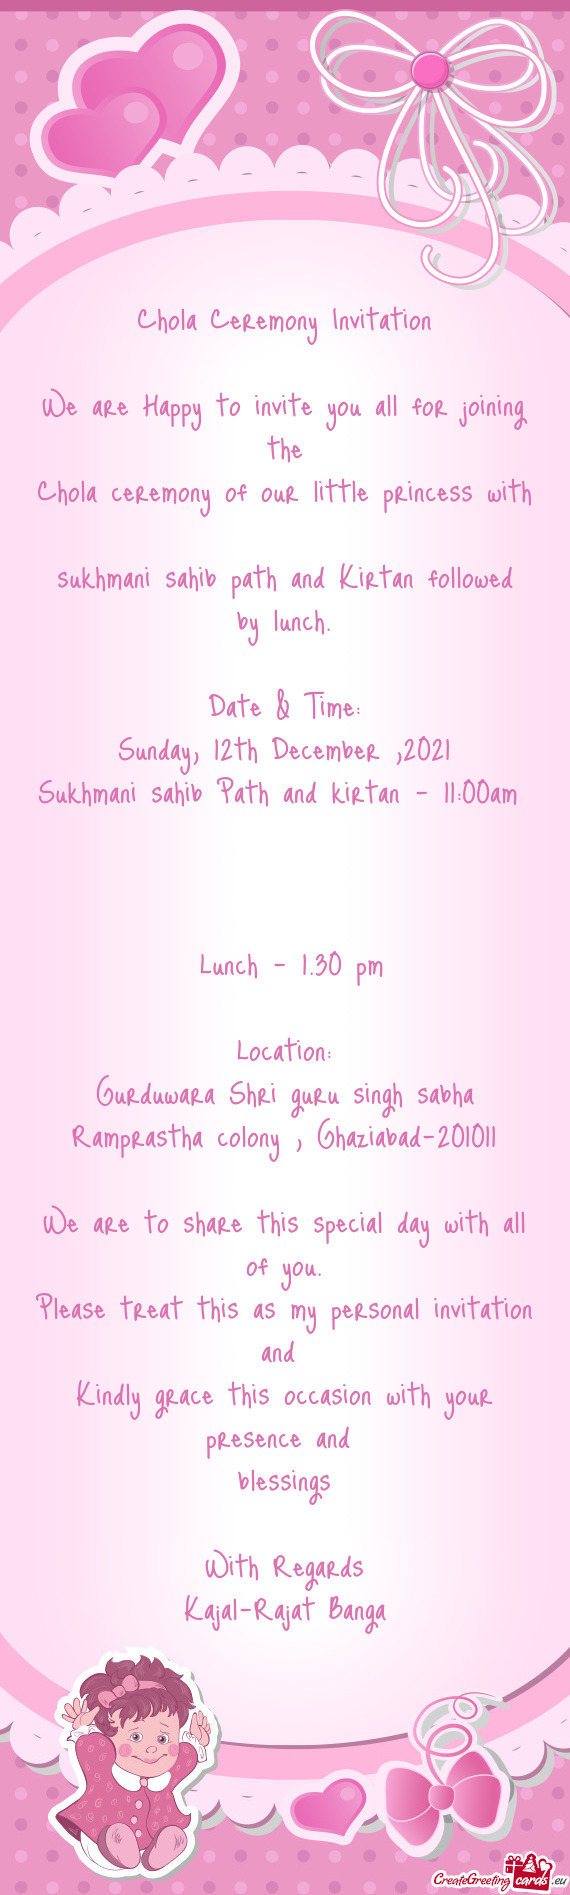 Chola ceremony of our little princess with sukhmani sahib path and Kirtan followed by lunch